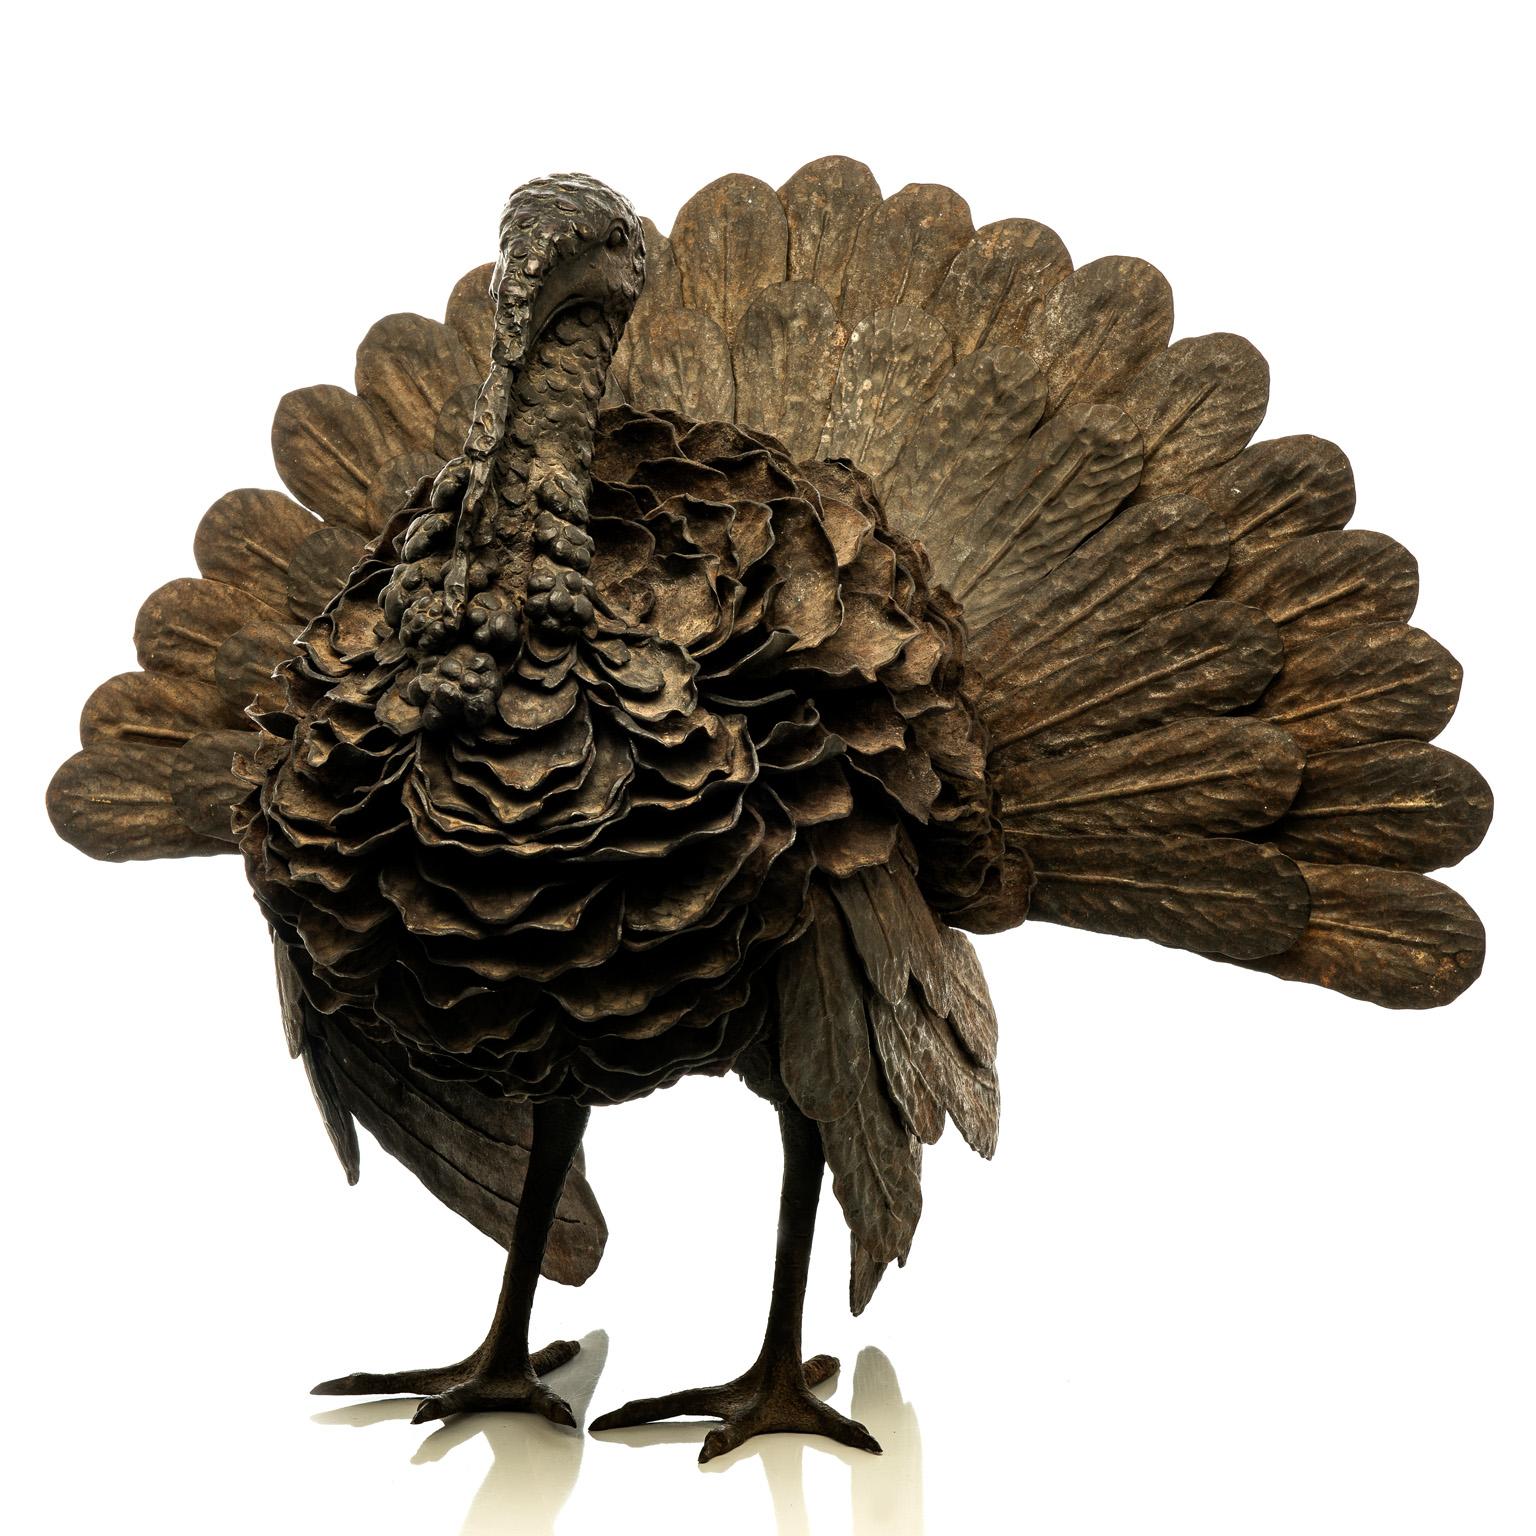 Exclusive and unique Italian Art Nouveau sculpture, an hand forged wrought iron turkey sculpture, a life-size iron masterpiece, a turkey figure fully hand-made in museum quality, in the manner of Alessandro Mazzucotelli.

This impressive quality